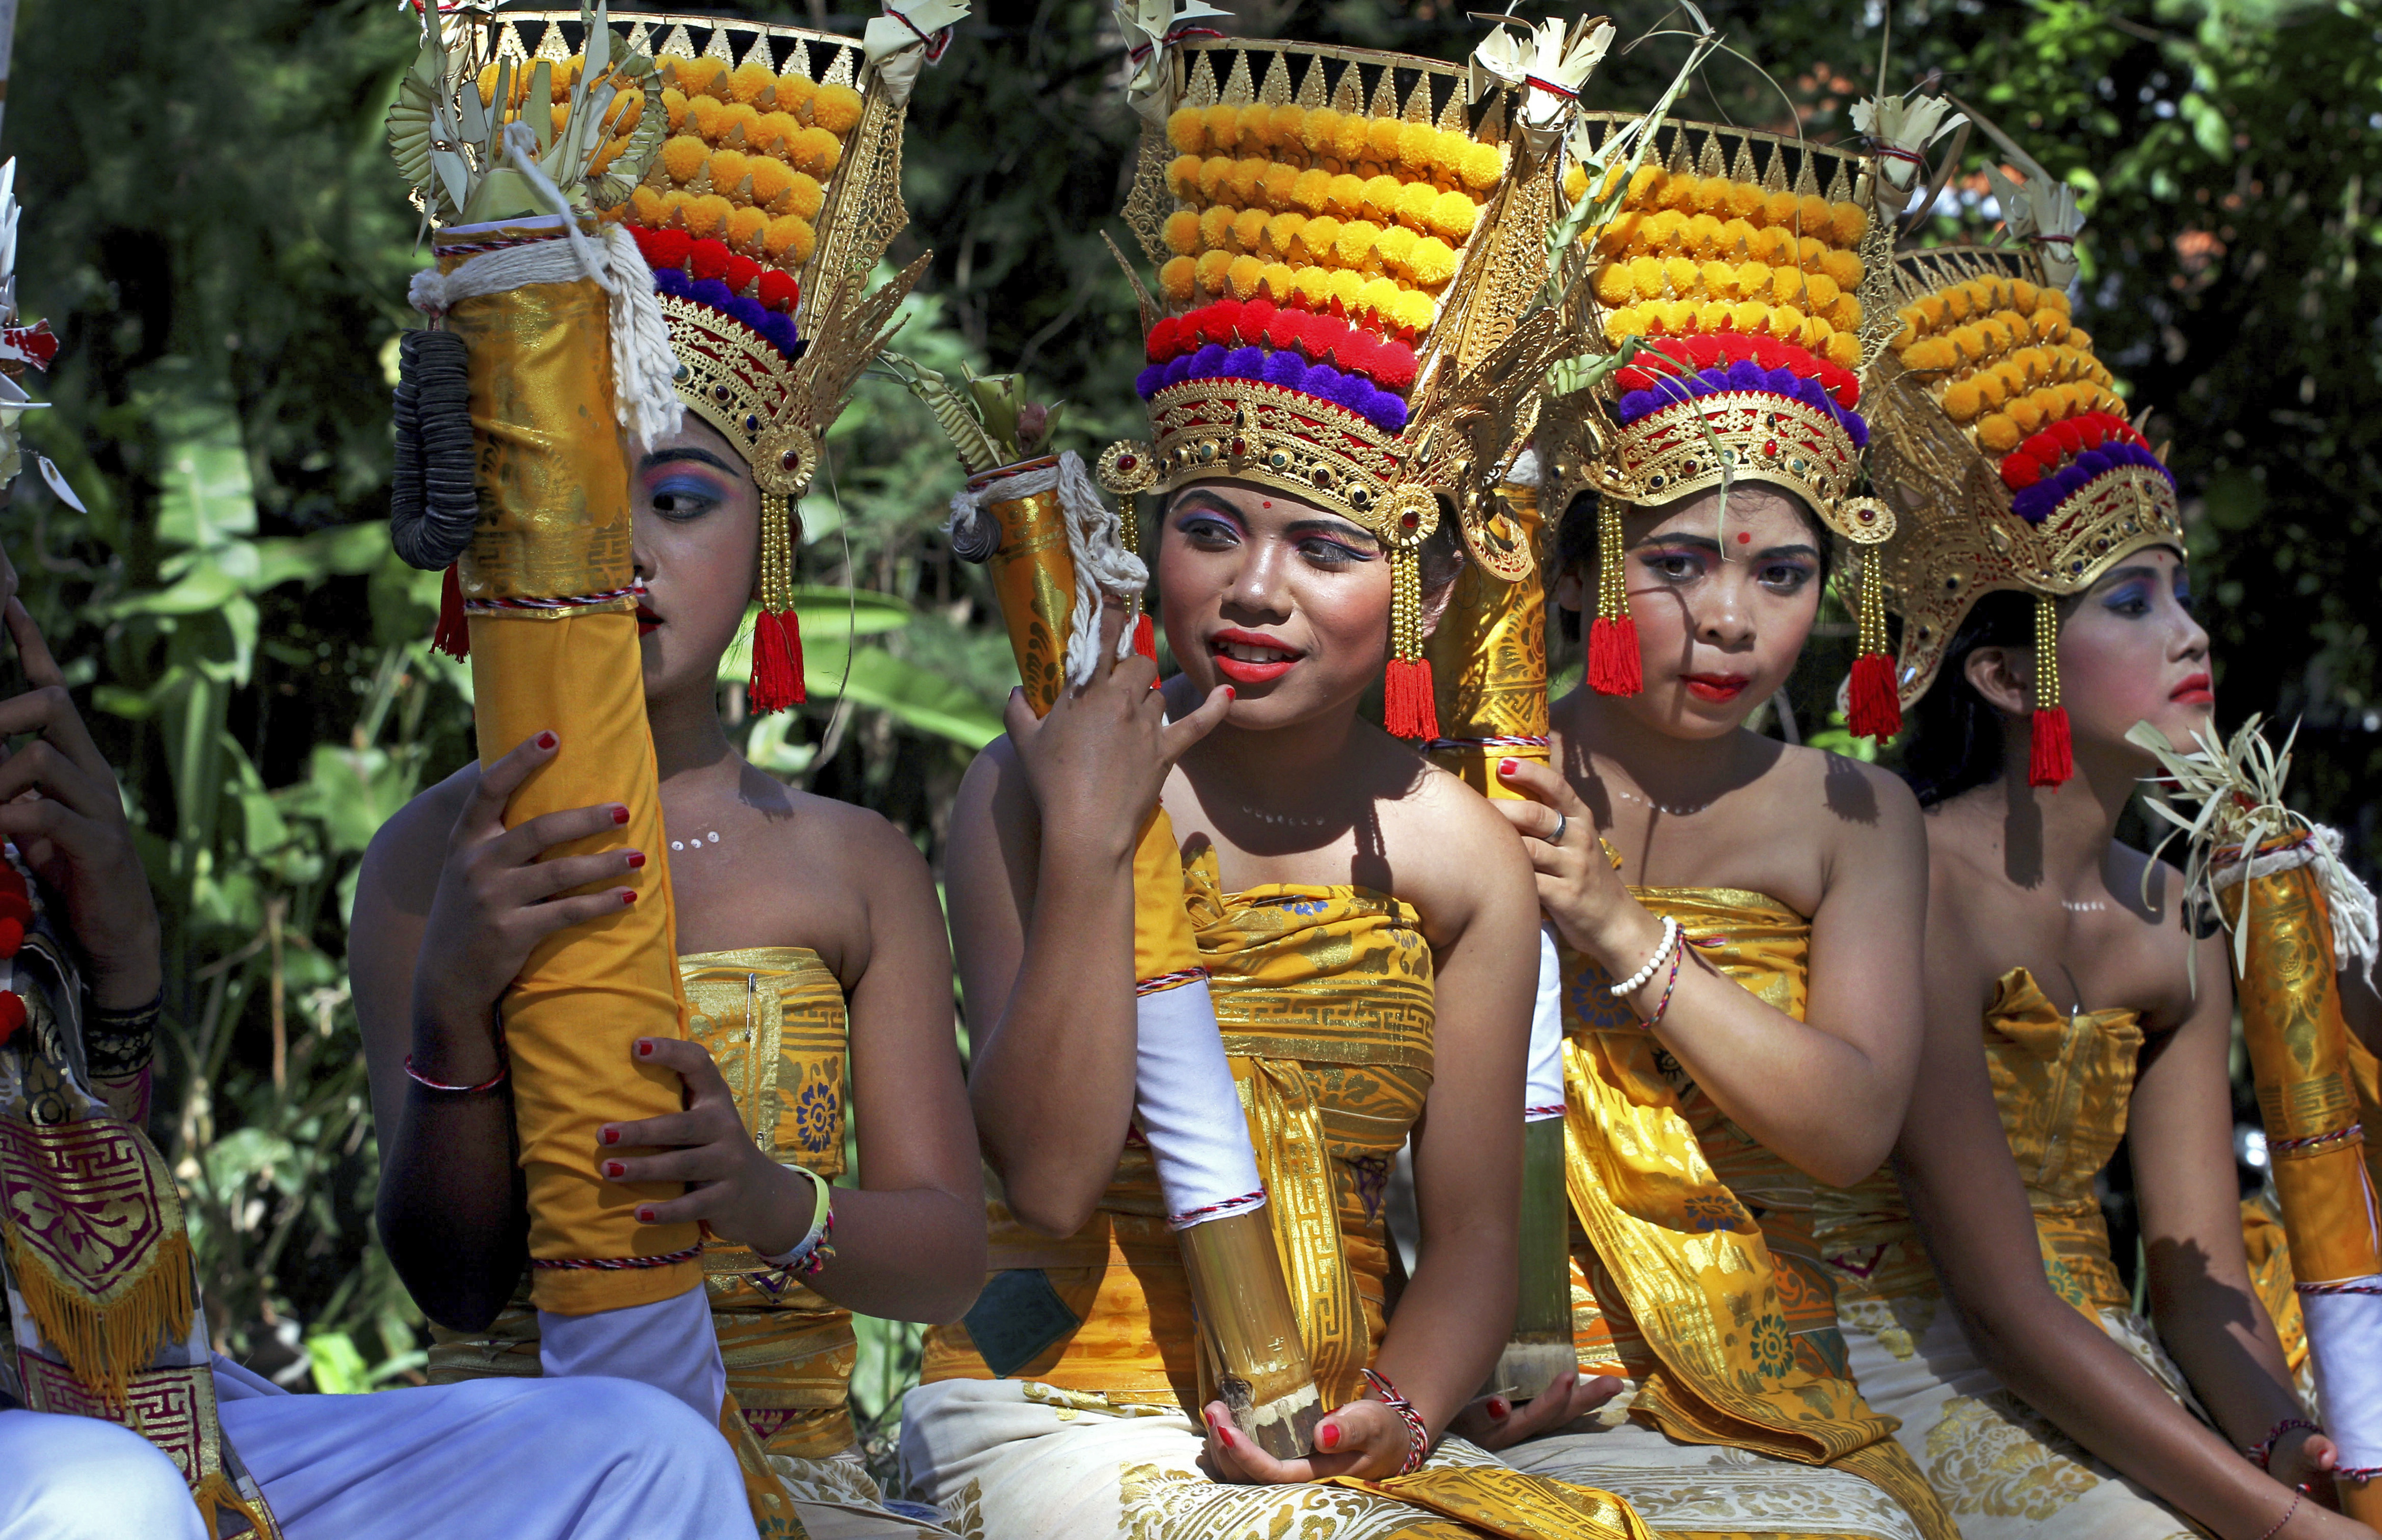 Balinese girls in traditional dress wait for a parade during the Bali Arts Festival in Bali, Indonesia, Saturday, June 10, 2017. A month-long annual festival started on Saturday. (AP Photo/Firdia Lisnawati)